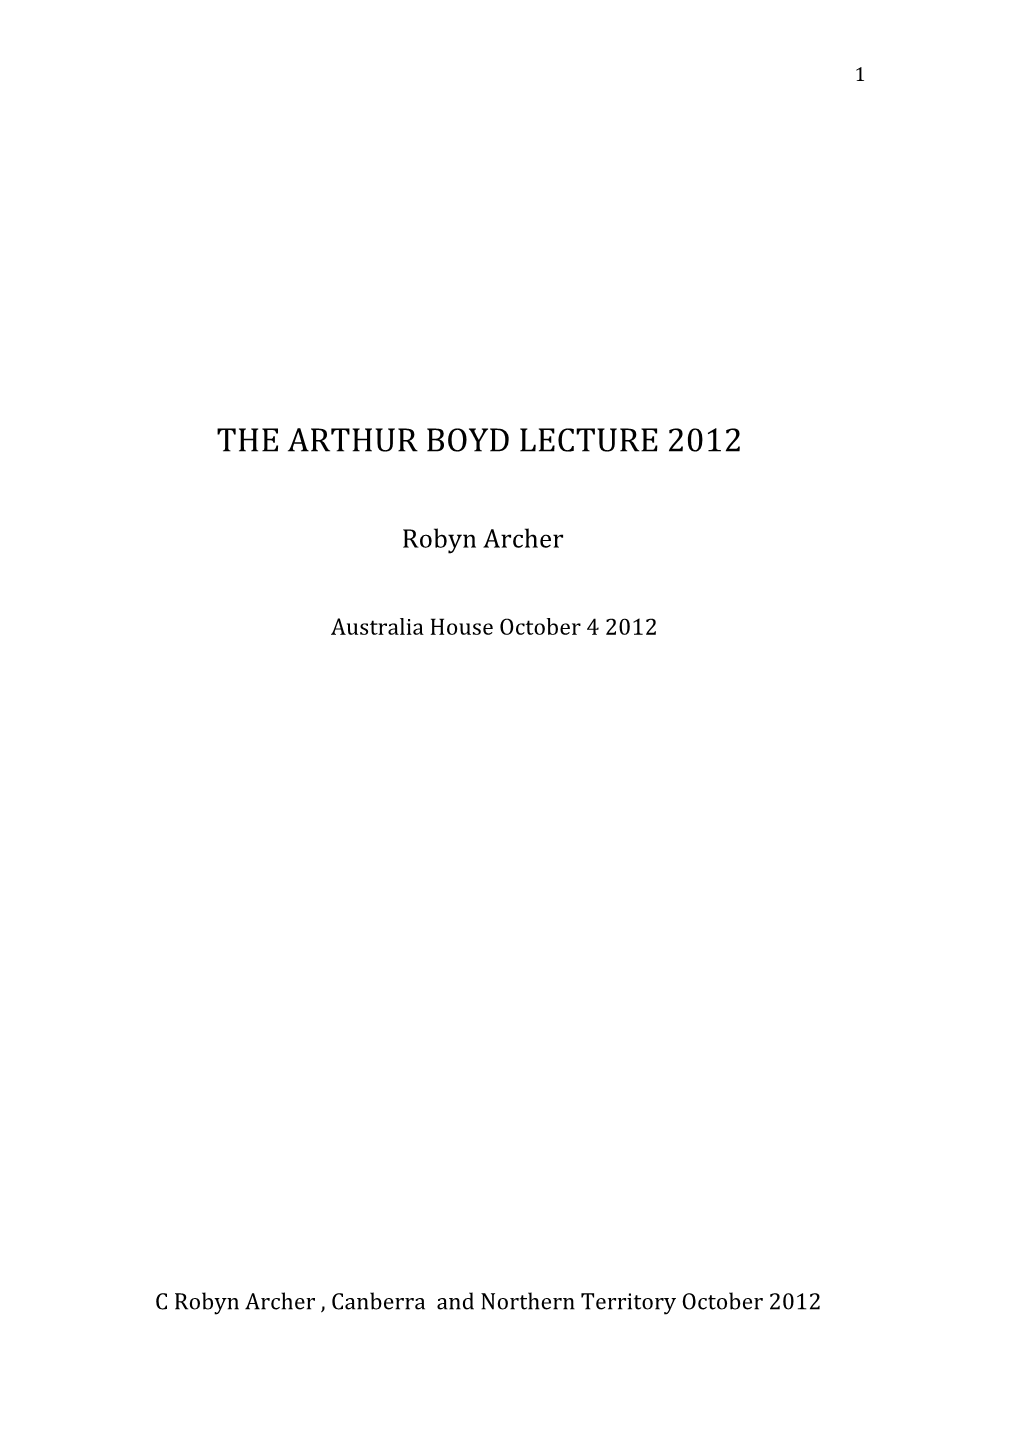 The Arthur Boyd Lecture 2012